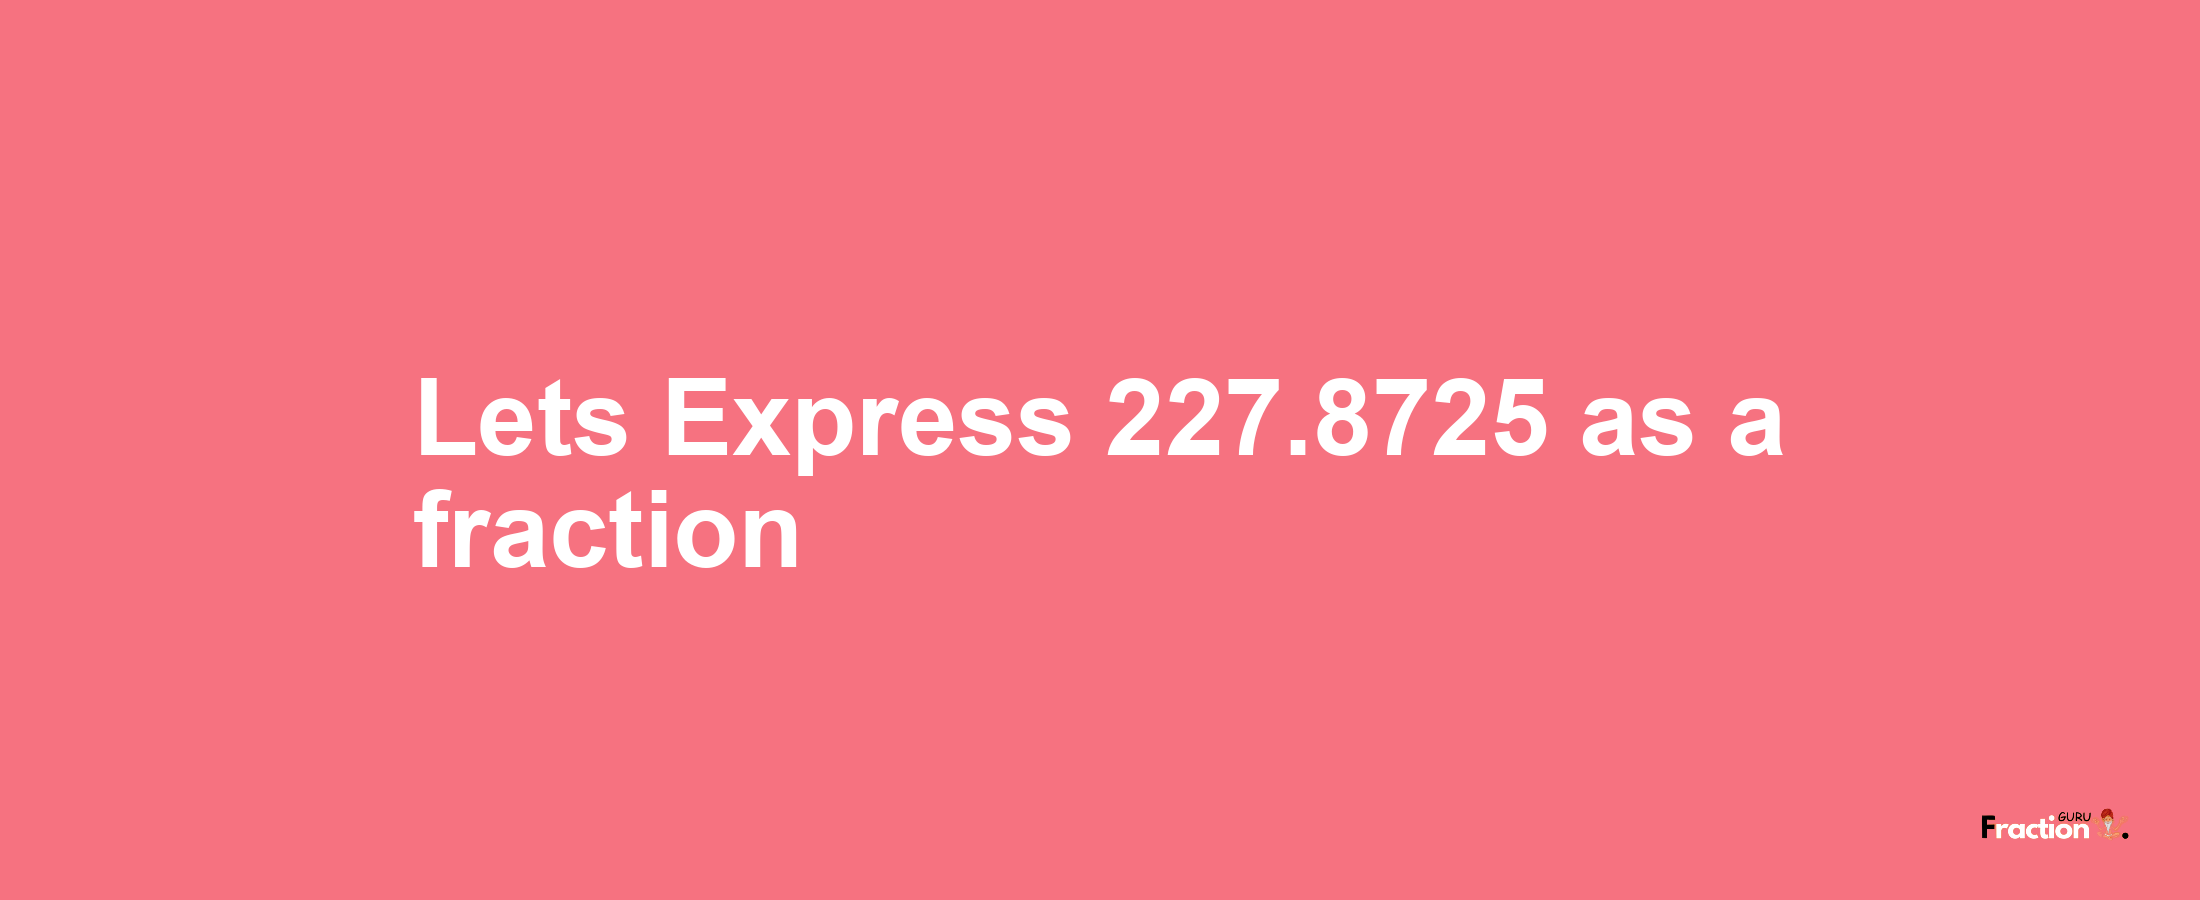 Lets Express 227.8725 as afraction